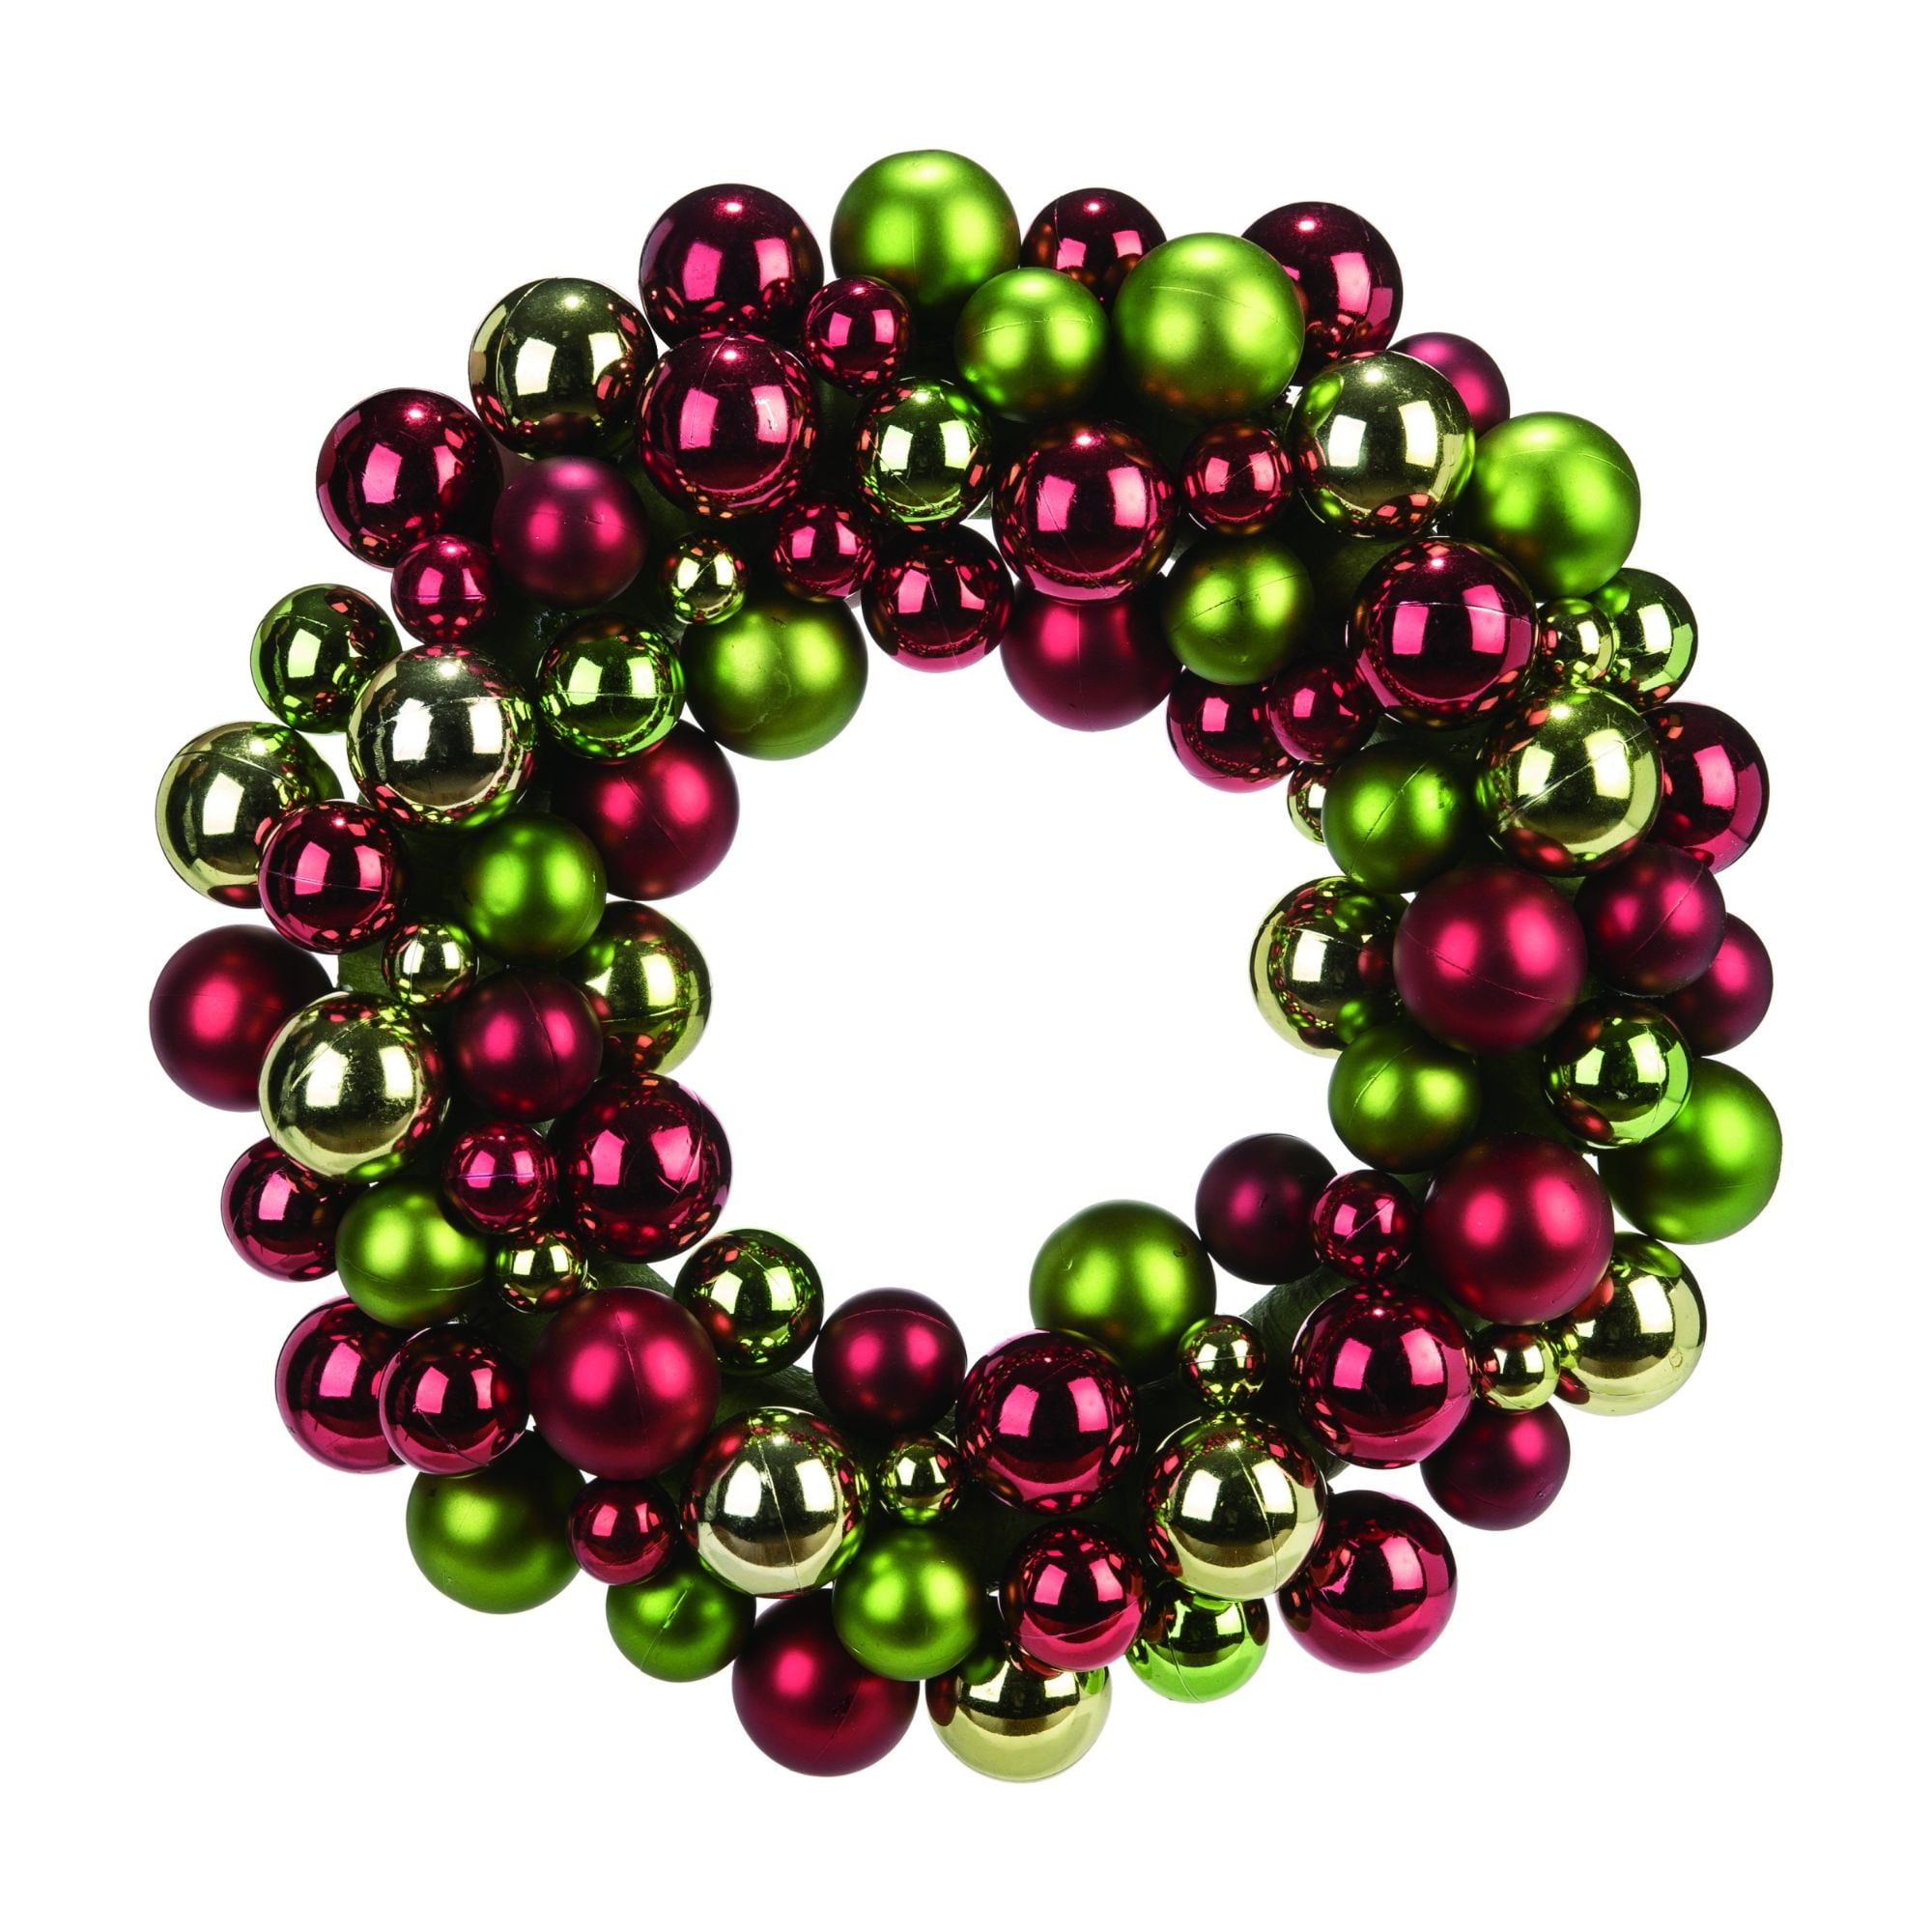 Red and Green Ball Ornamental Artificial Christmas Wreath - 17-Inch ...